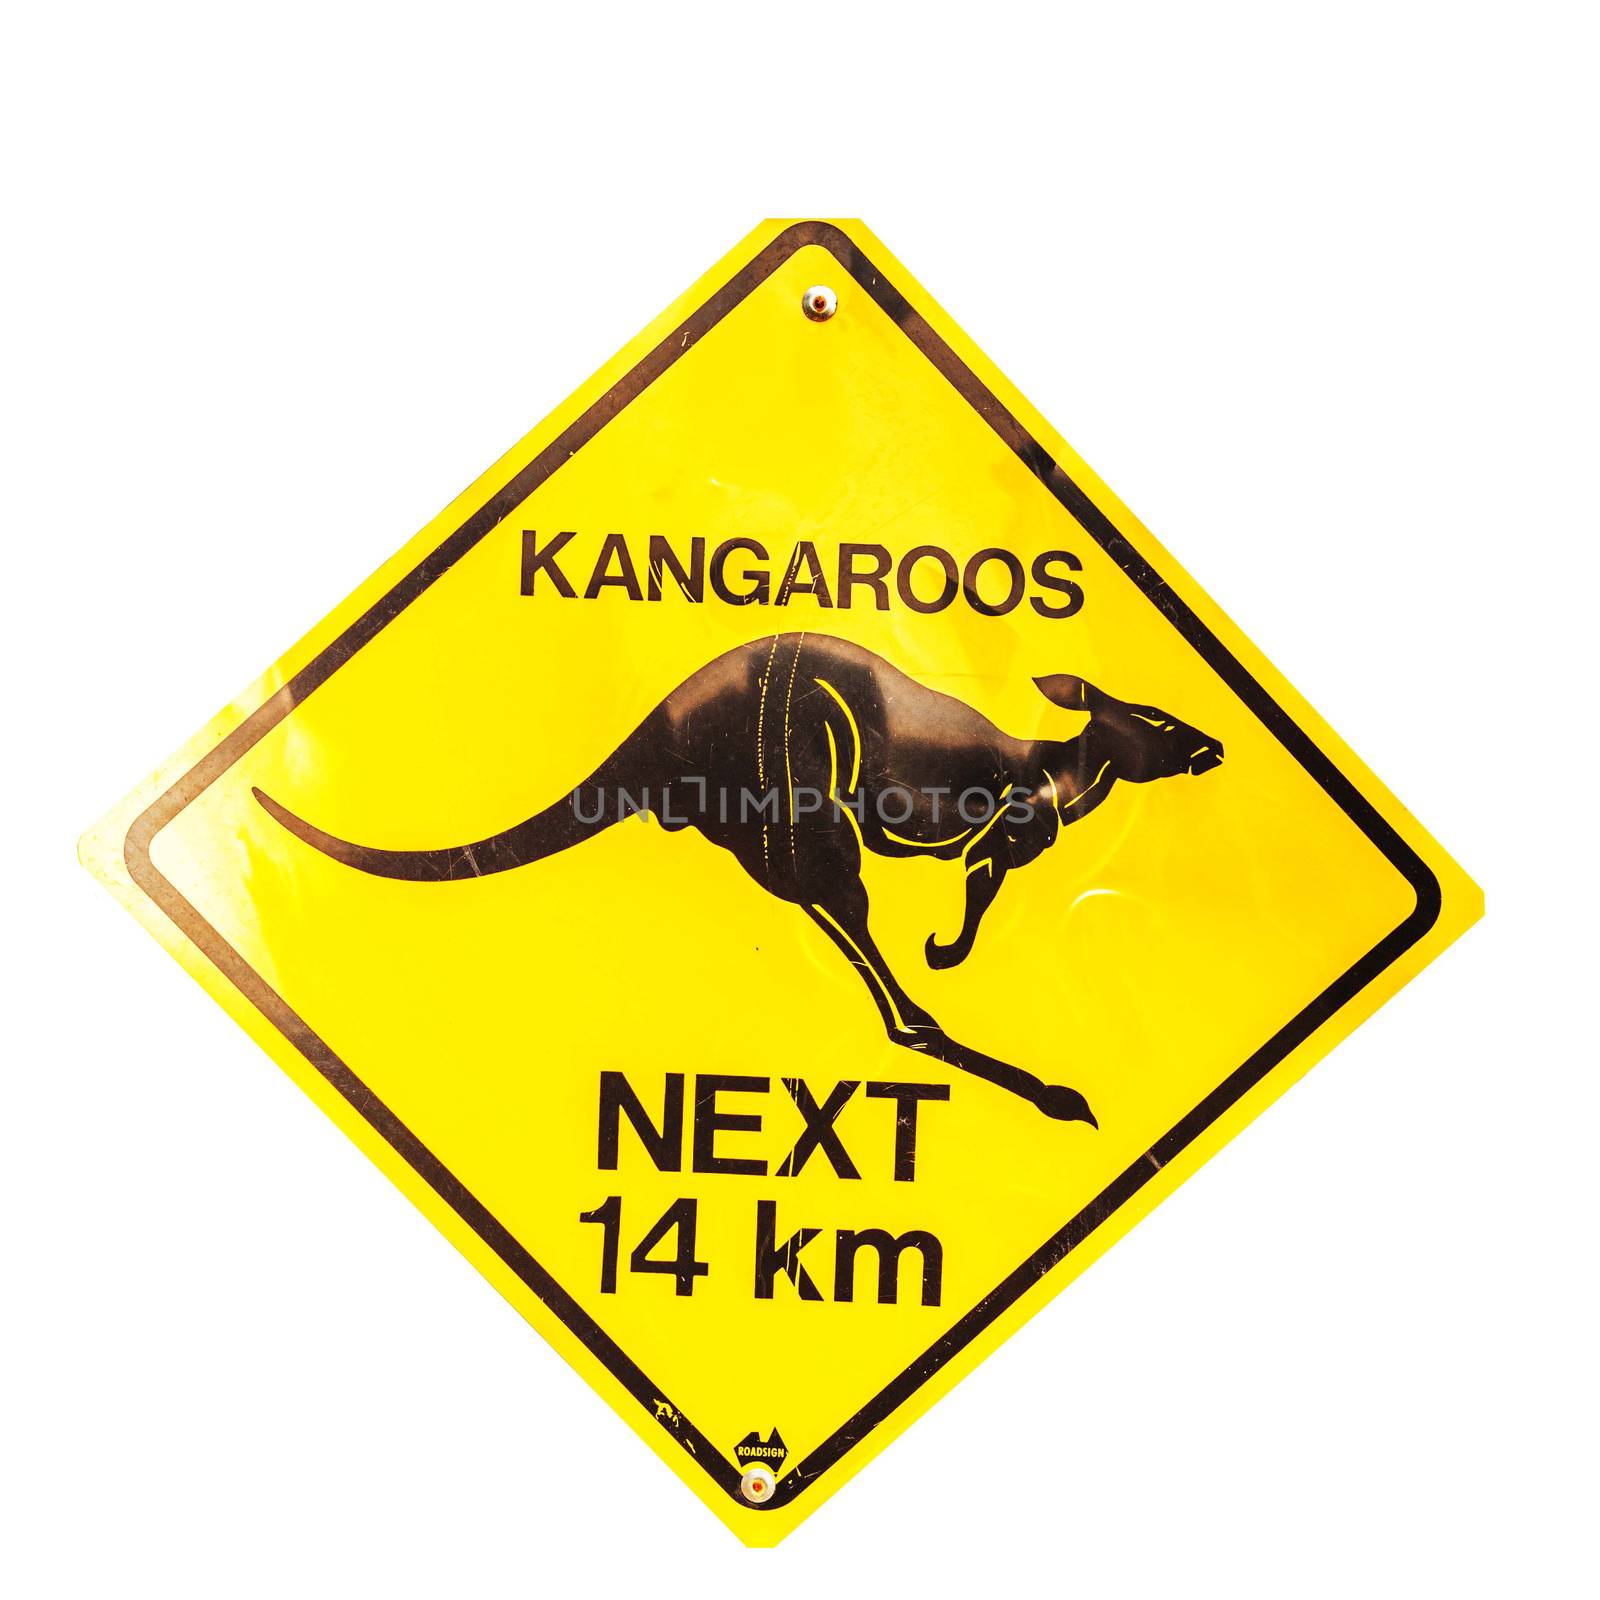 Kangaroos sign with clipping path .